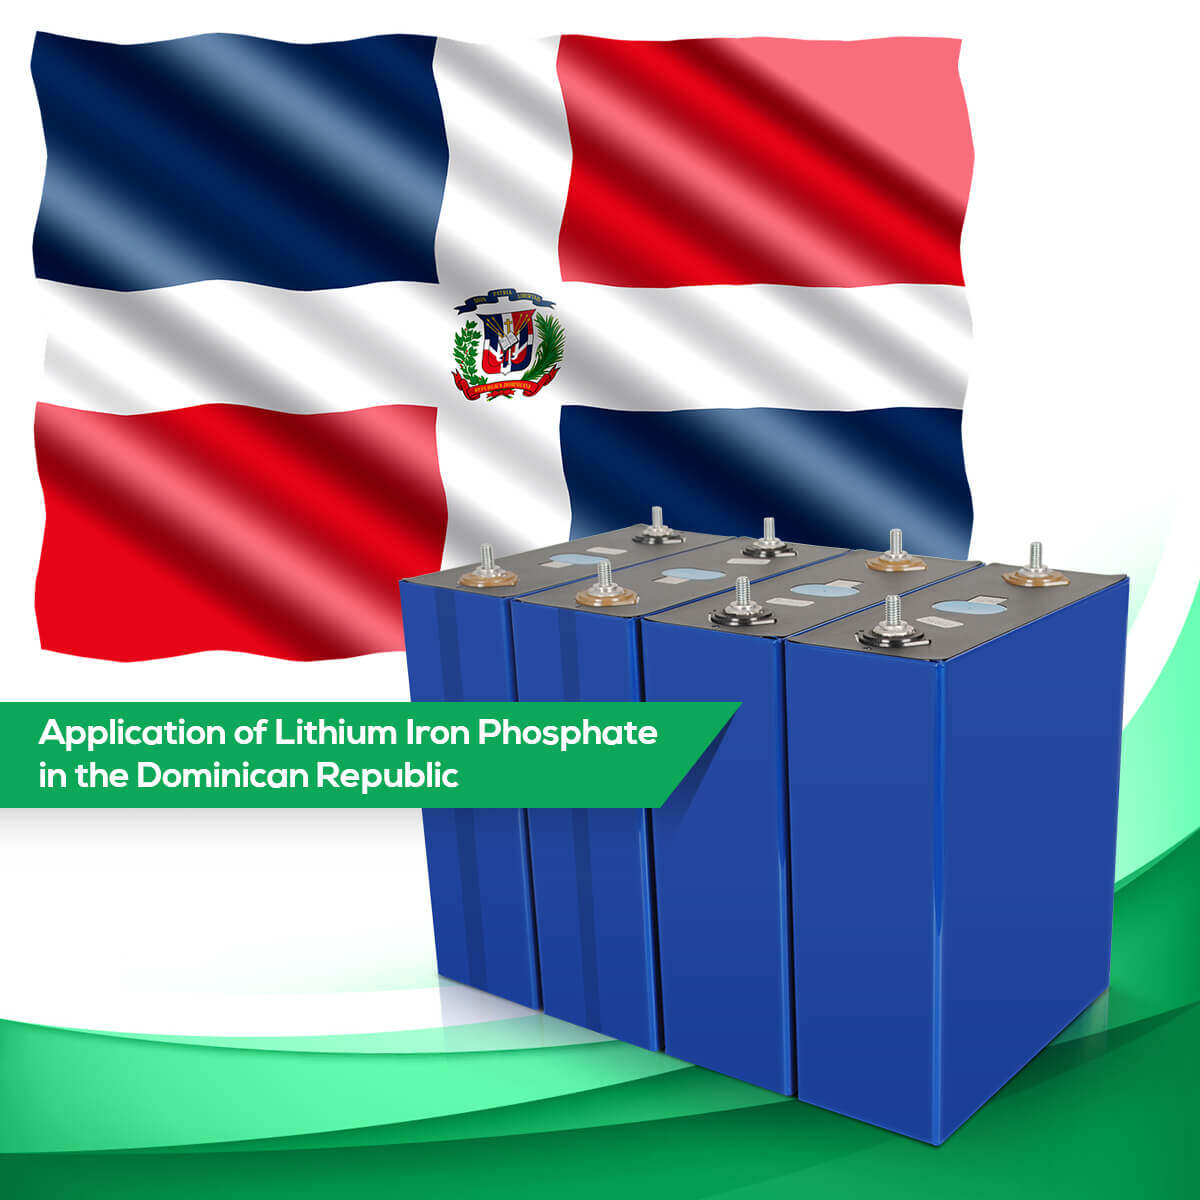 Application of Lithium Iron Phosphate in the Dominican Republic